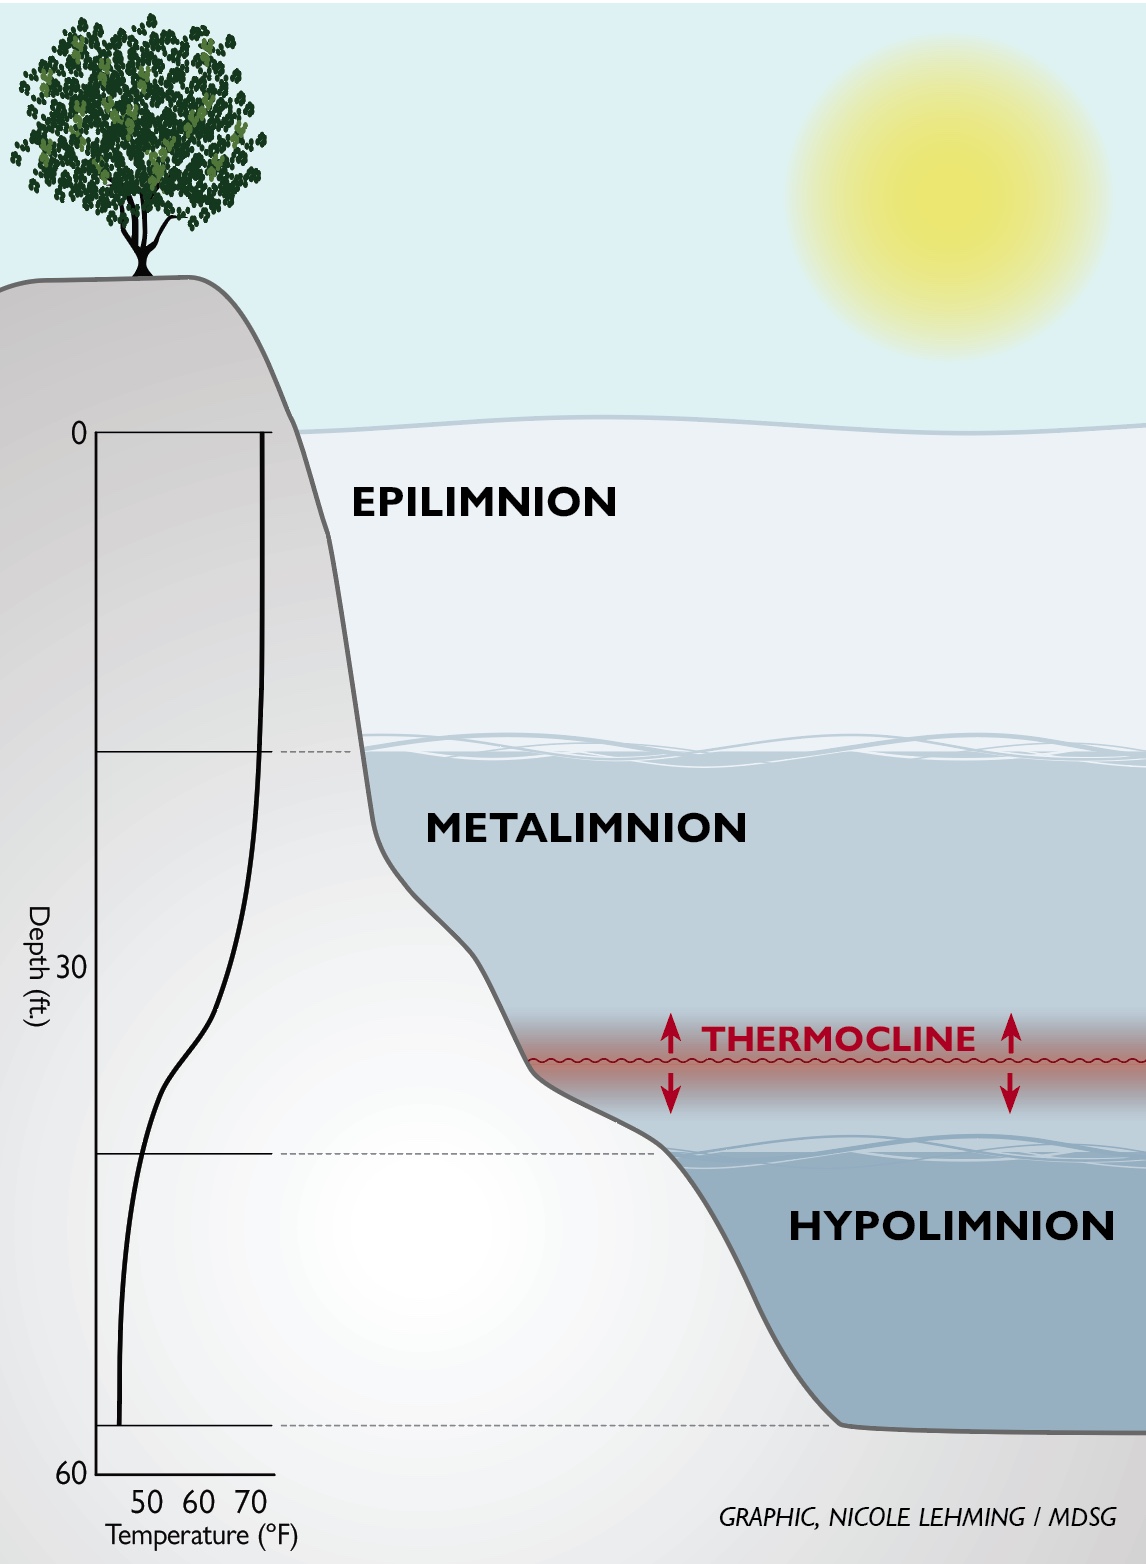 Illustriative graph showing the different temperature zones in the water column of Hyde’s Quarry. Starting at the top warmest zone, the Epilimnion averages 70 degrees fahrenheit, it has a depth of 15 feet. The zone below that is the Metalimnion, ranging 50-70 degrees fahrenheit, and has a depth of 15 to 45 feet. Within this zone is the Thermocline, which varies it's depth regularly. The deepest zone is the Hypolimnion zone, which ranges in depth from 45 to 60 feet, and has a temperature of 45 to 50 degrees. 